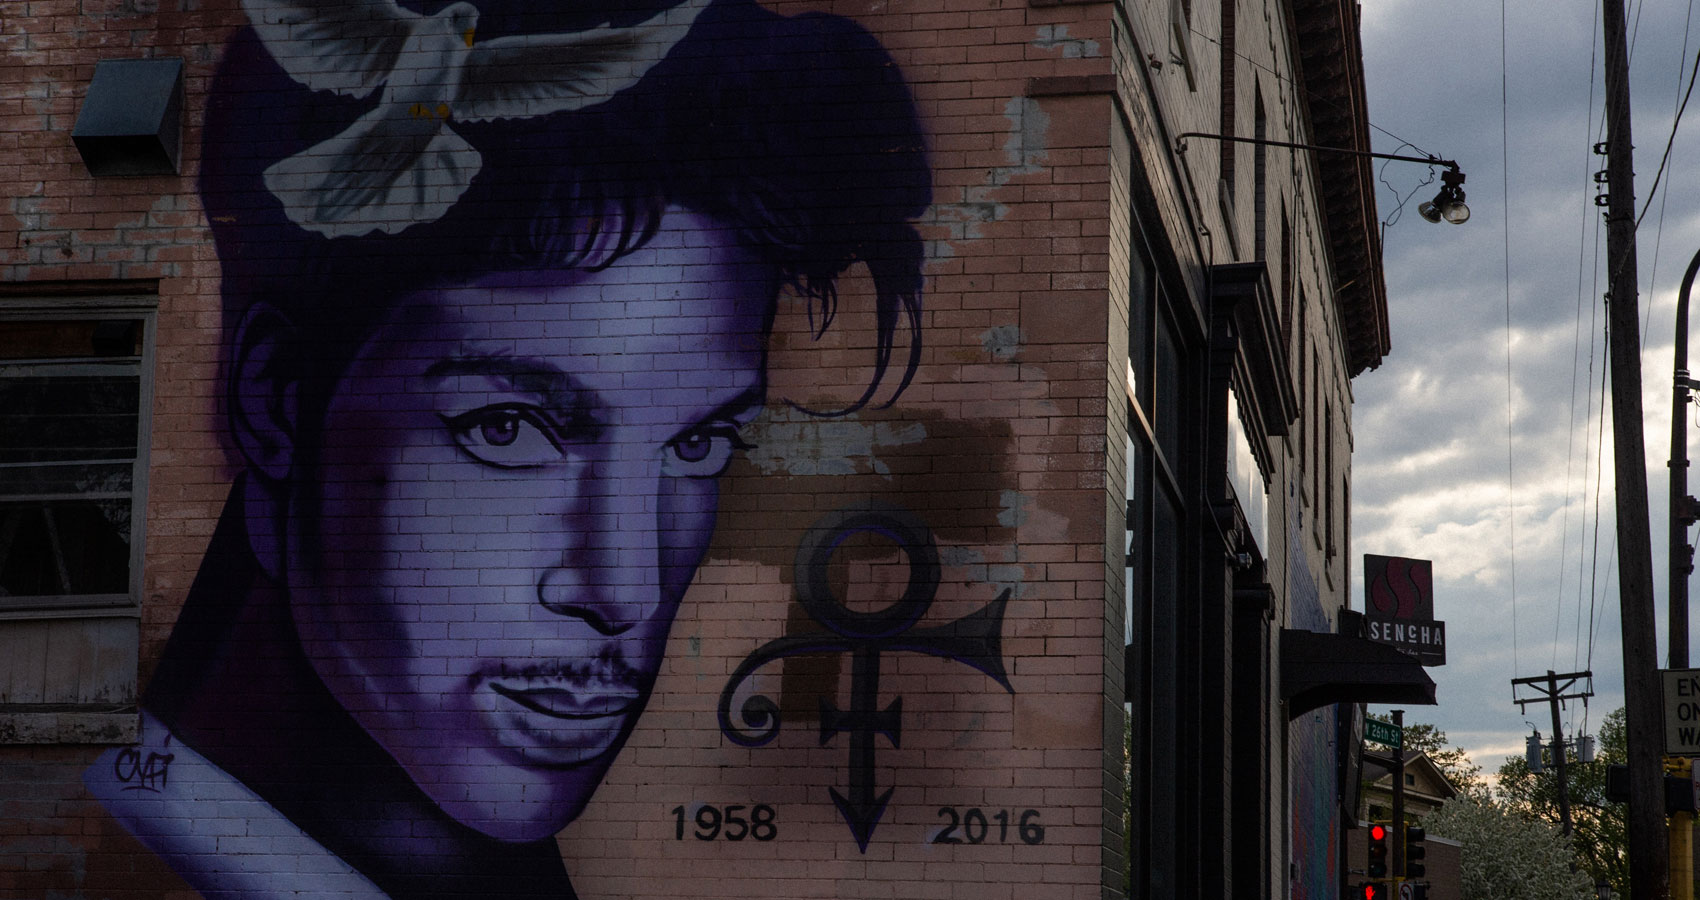 Joni Mitchell's Influence on Prince, article by Philip D. Webb at Spillwords.com